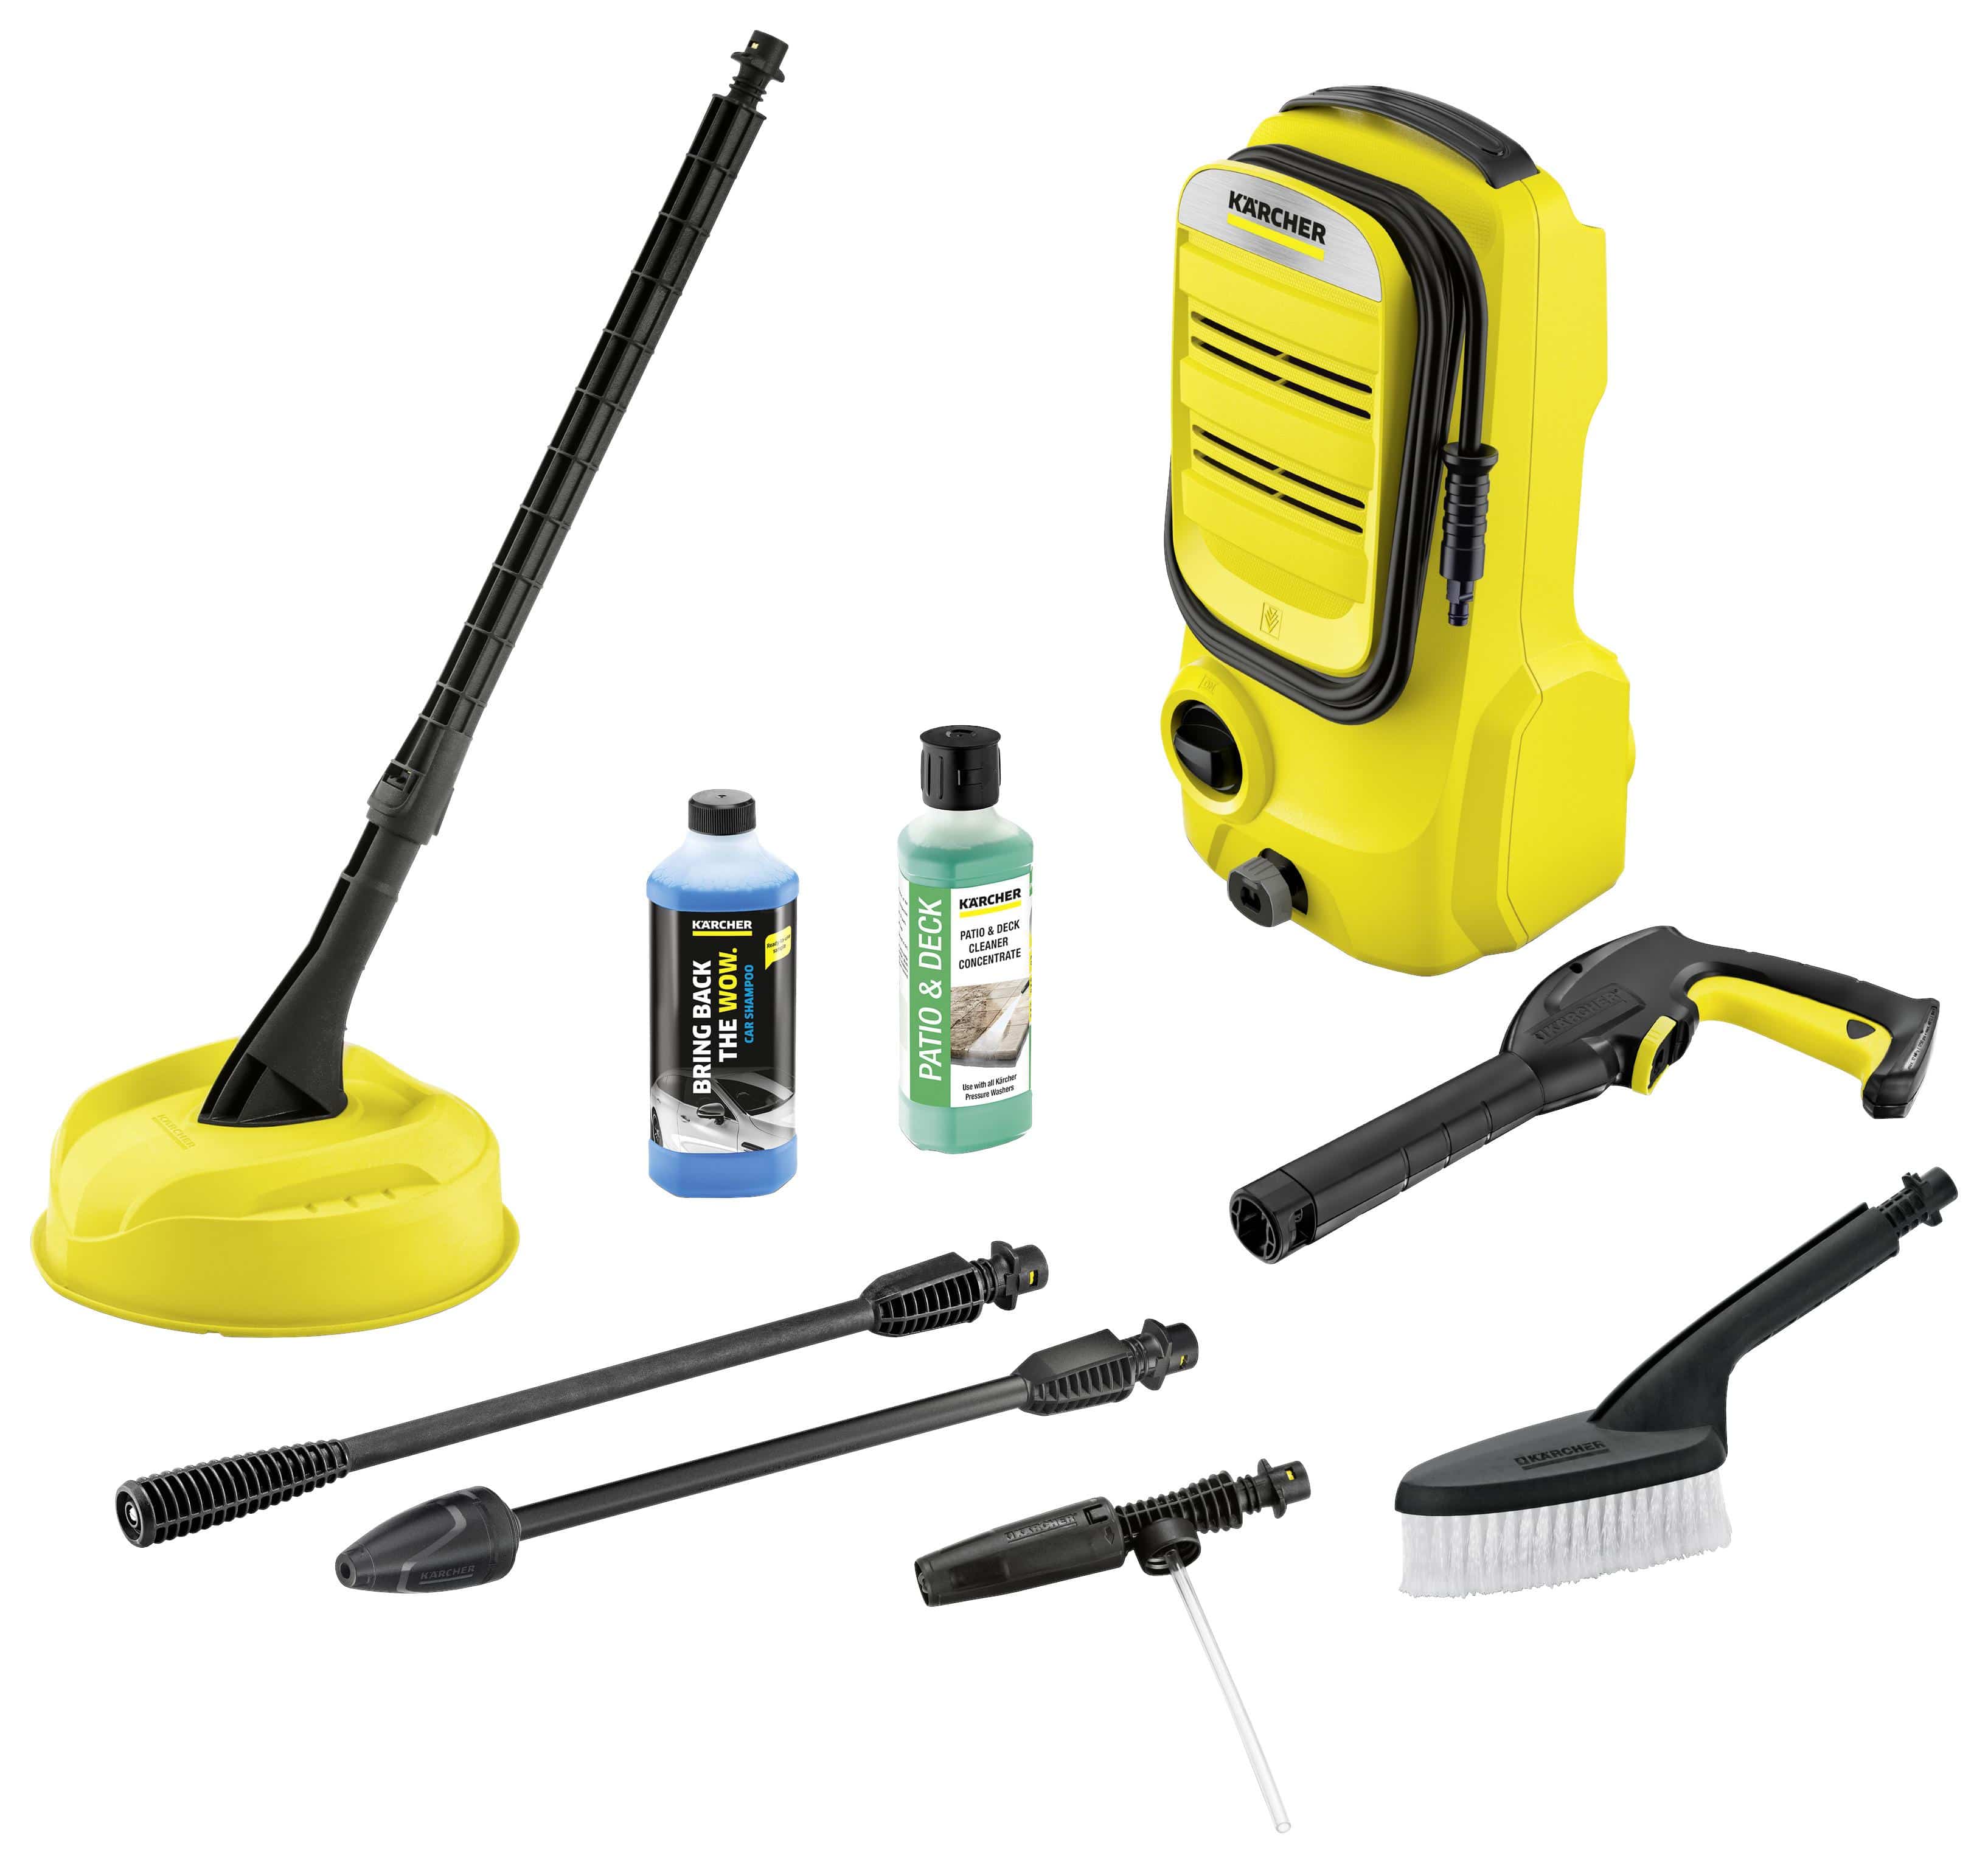 Karcher Electric K2 Compact Car & Home High Pressure Washer 110 Bar | Supply Master | Accra, Ghana Tools Building Steel Engineering Hardware tool